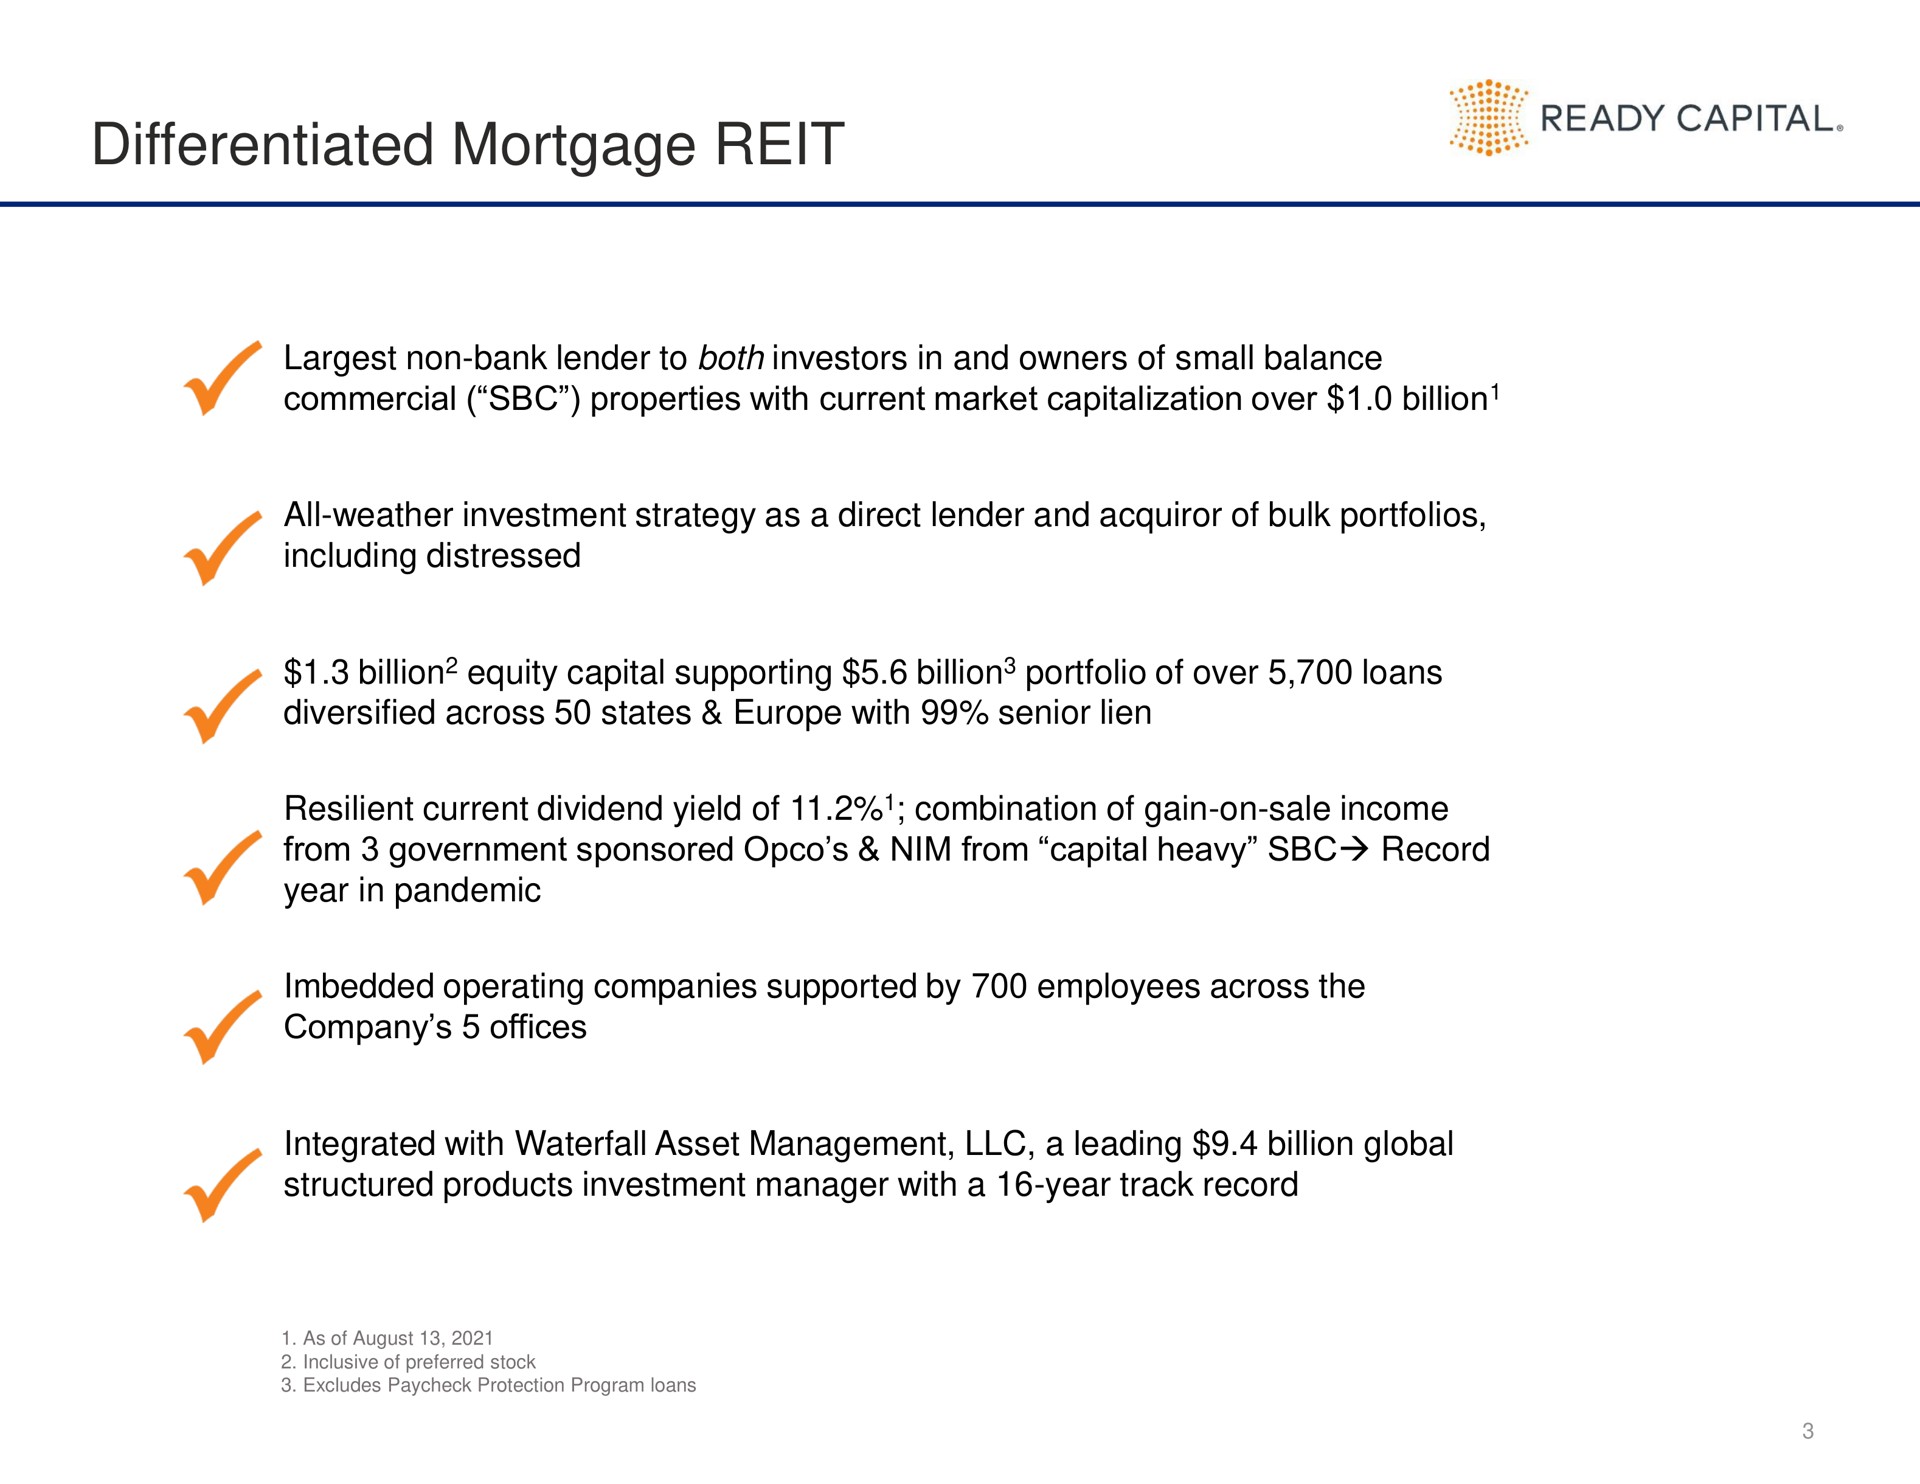 differentiated mortgage reit | Ready Capital